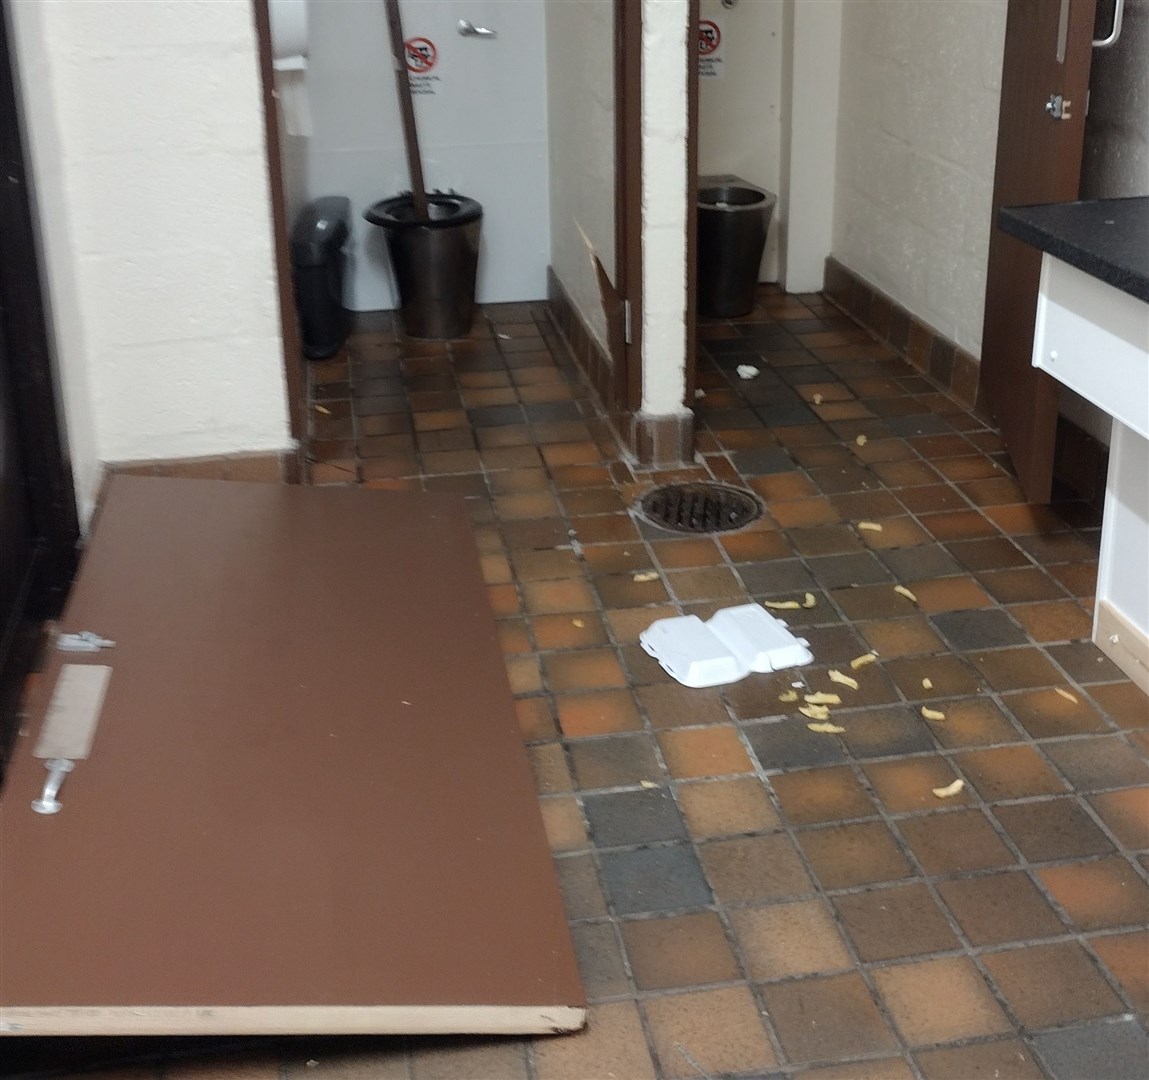 Muir of Ord toilets are the latest to have been closed due to persistent vandalism.